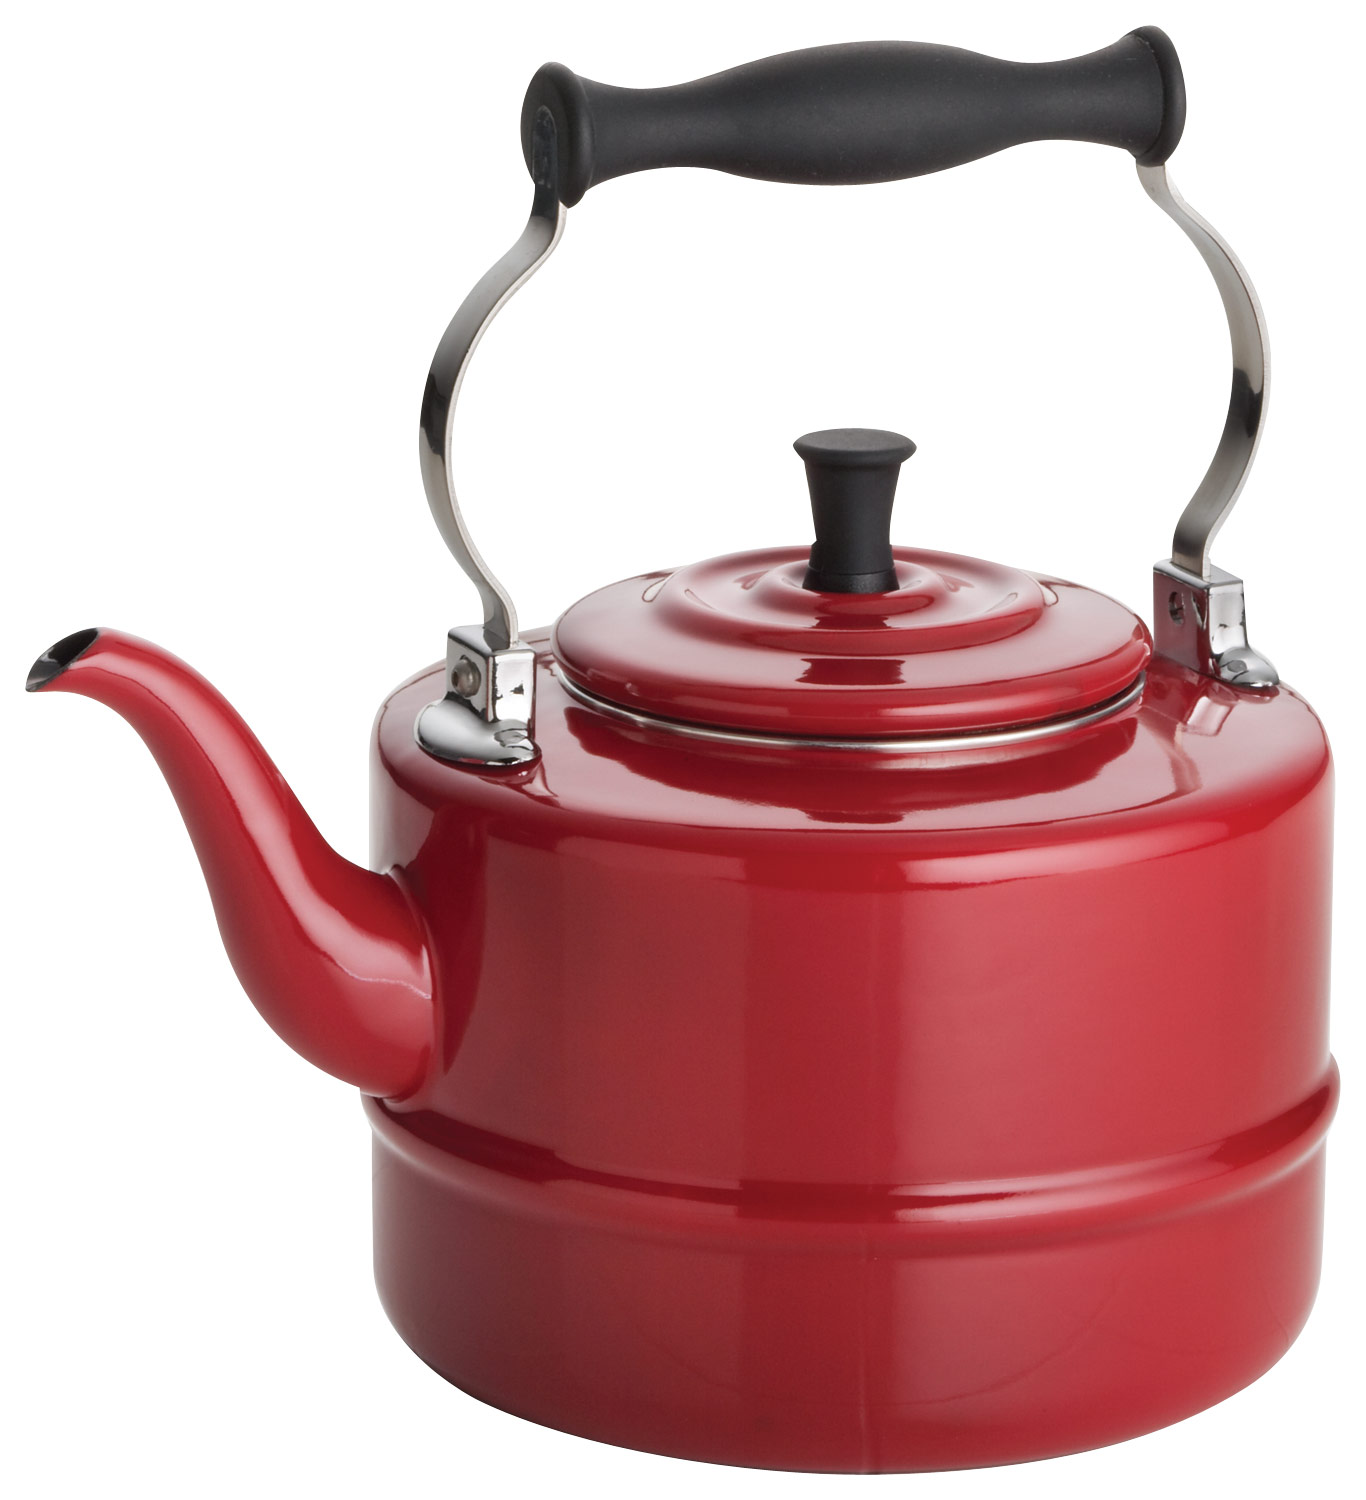 BonJour 8-Cup Stovetop Tea Kettle in Silver 53087 - The Home Depot